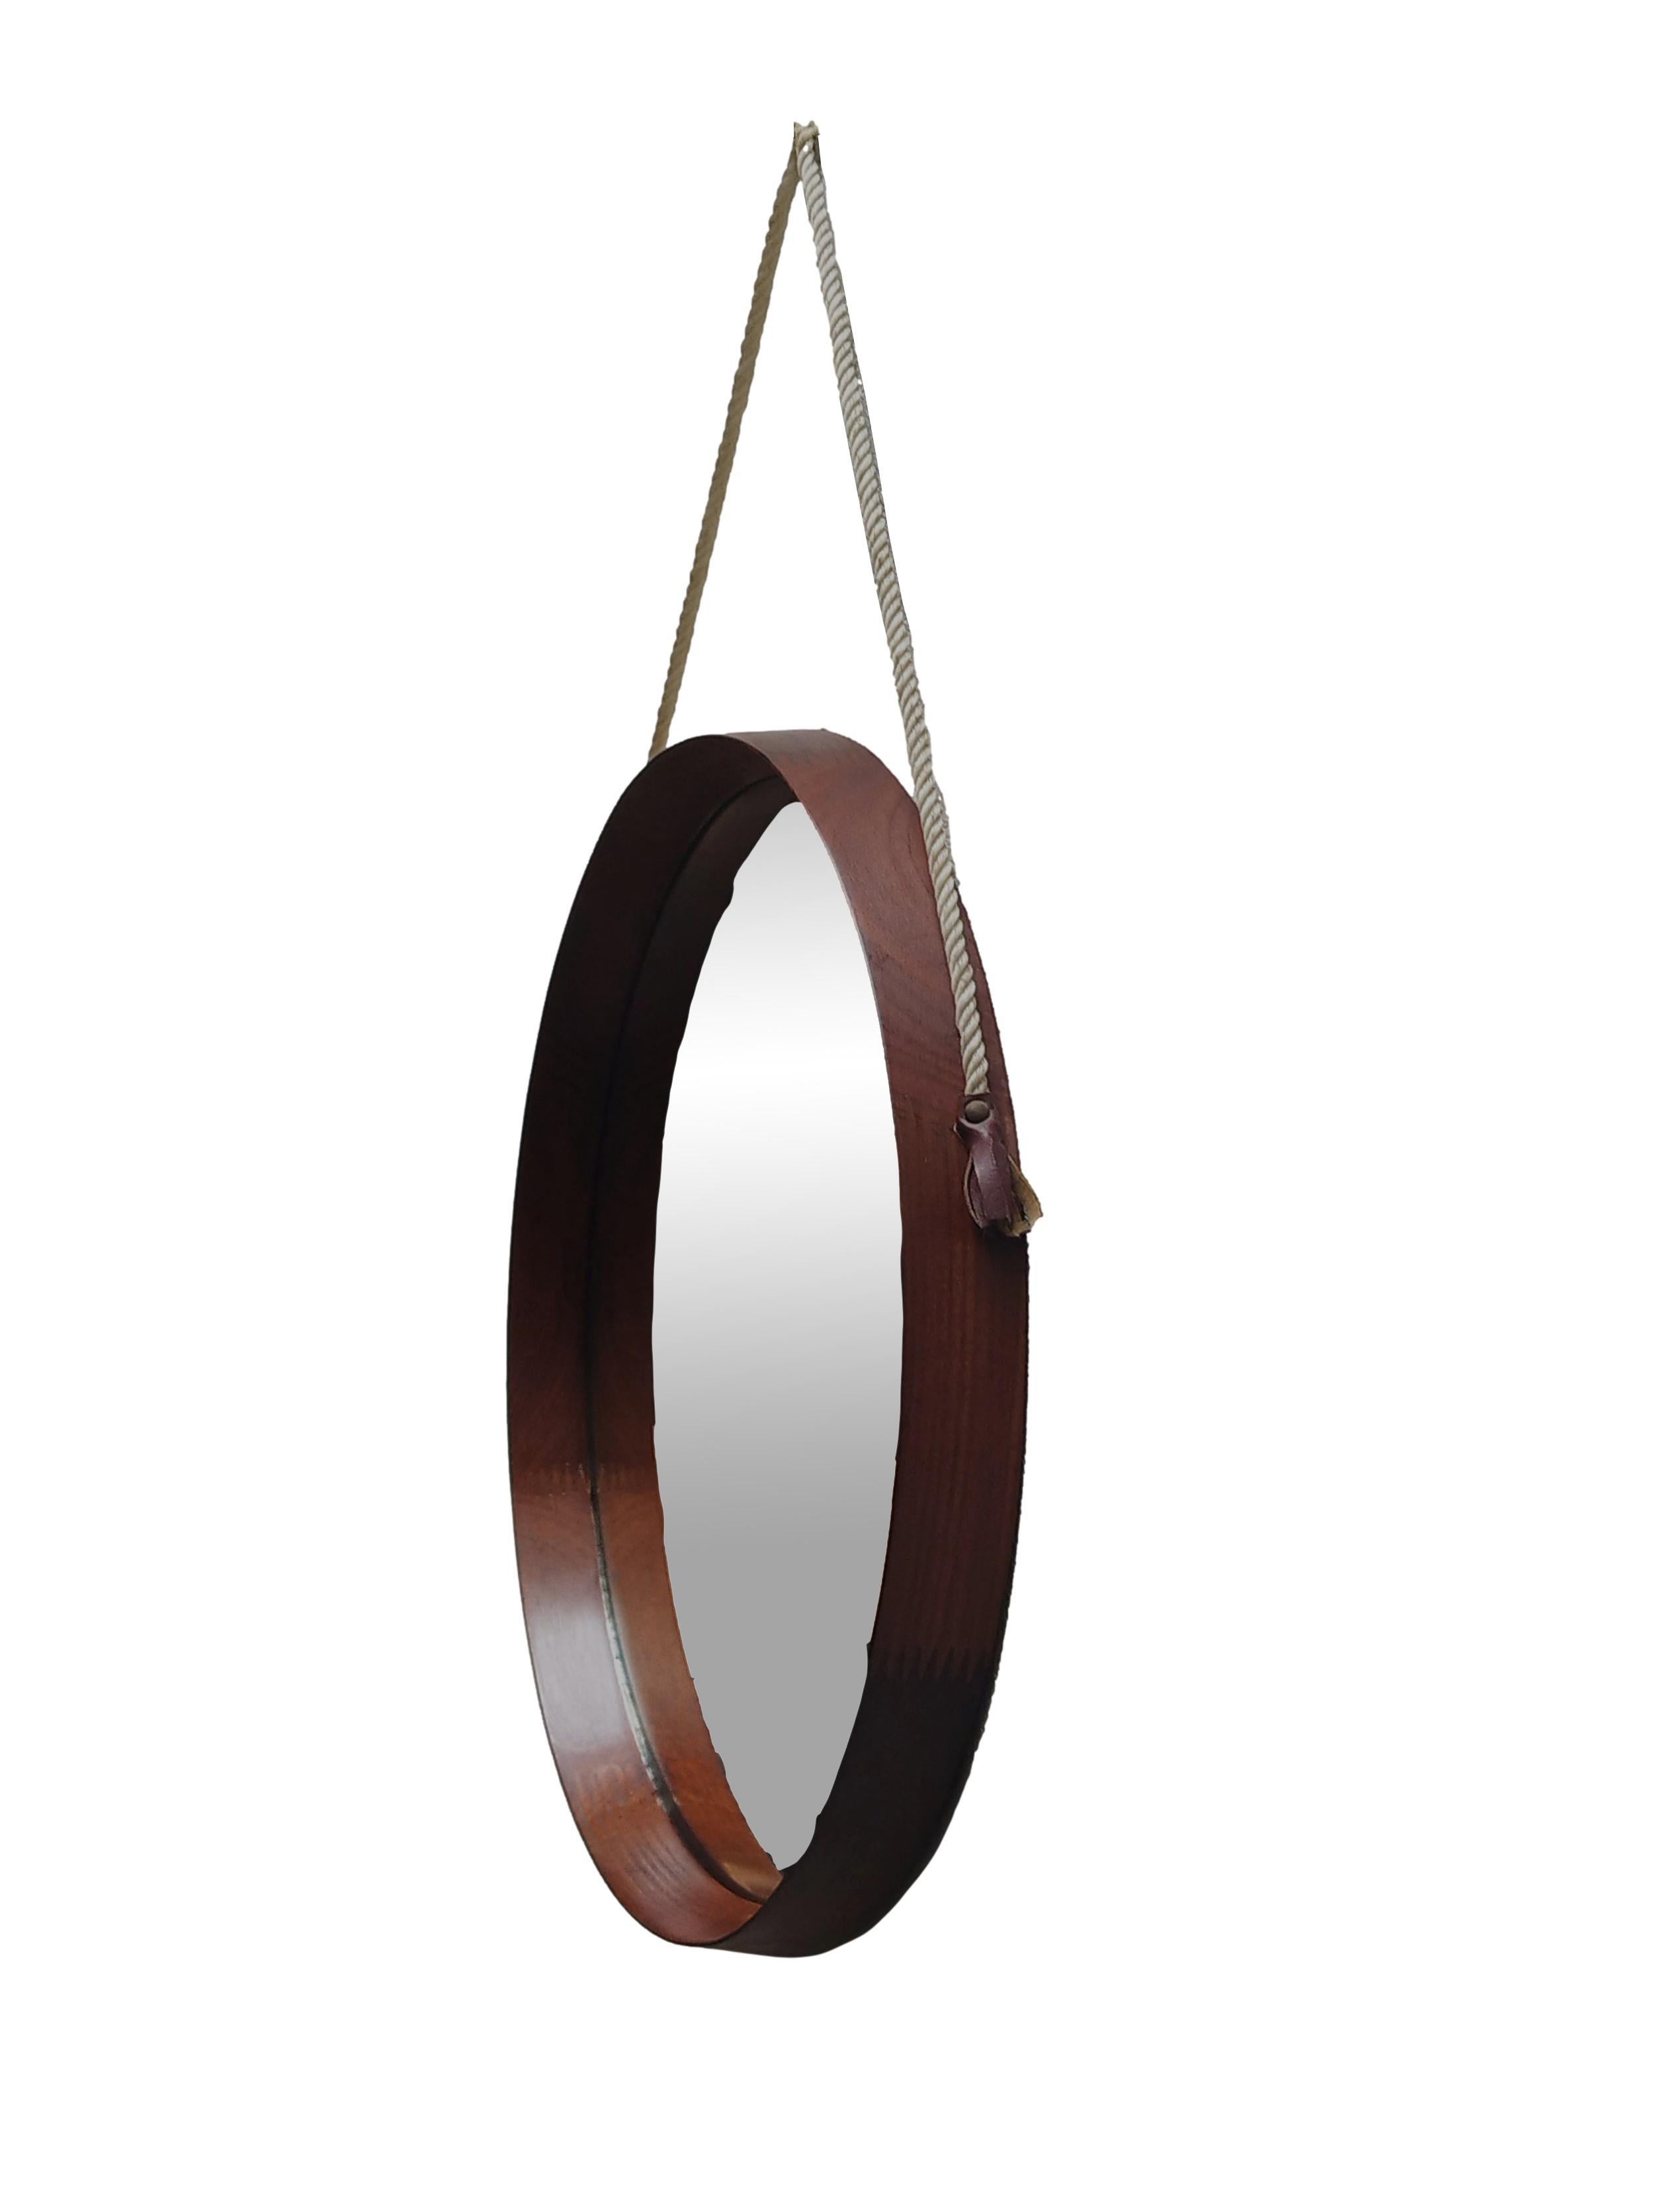 A circular wall mirror of Swedish manufacture, designed by Uno & Osten Kristiansson and produced by Luxus in the 1960s, it features a curved teak wood frame including a cord and leather strap for attachment.